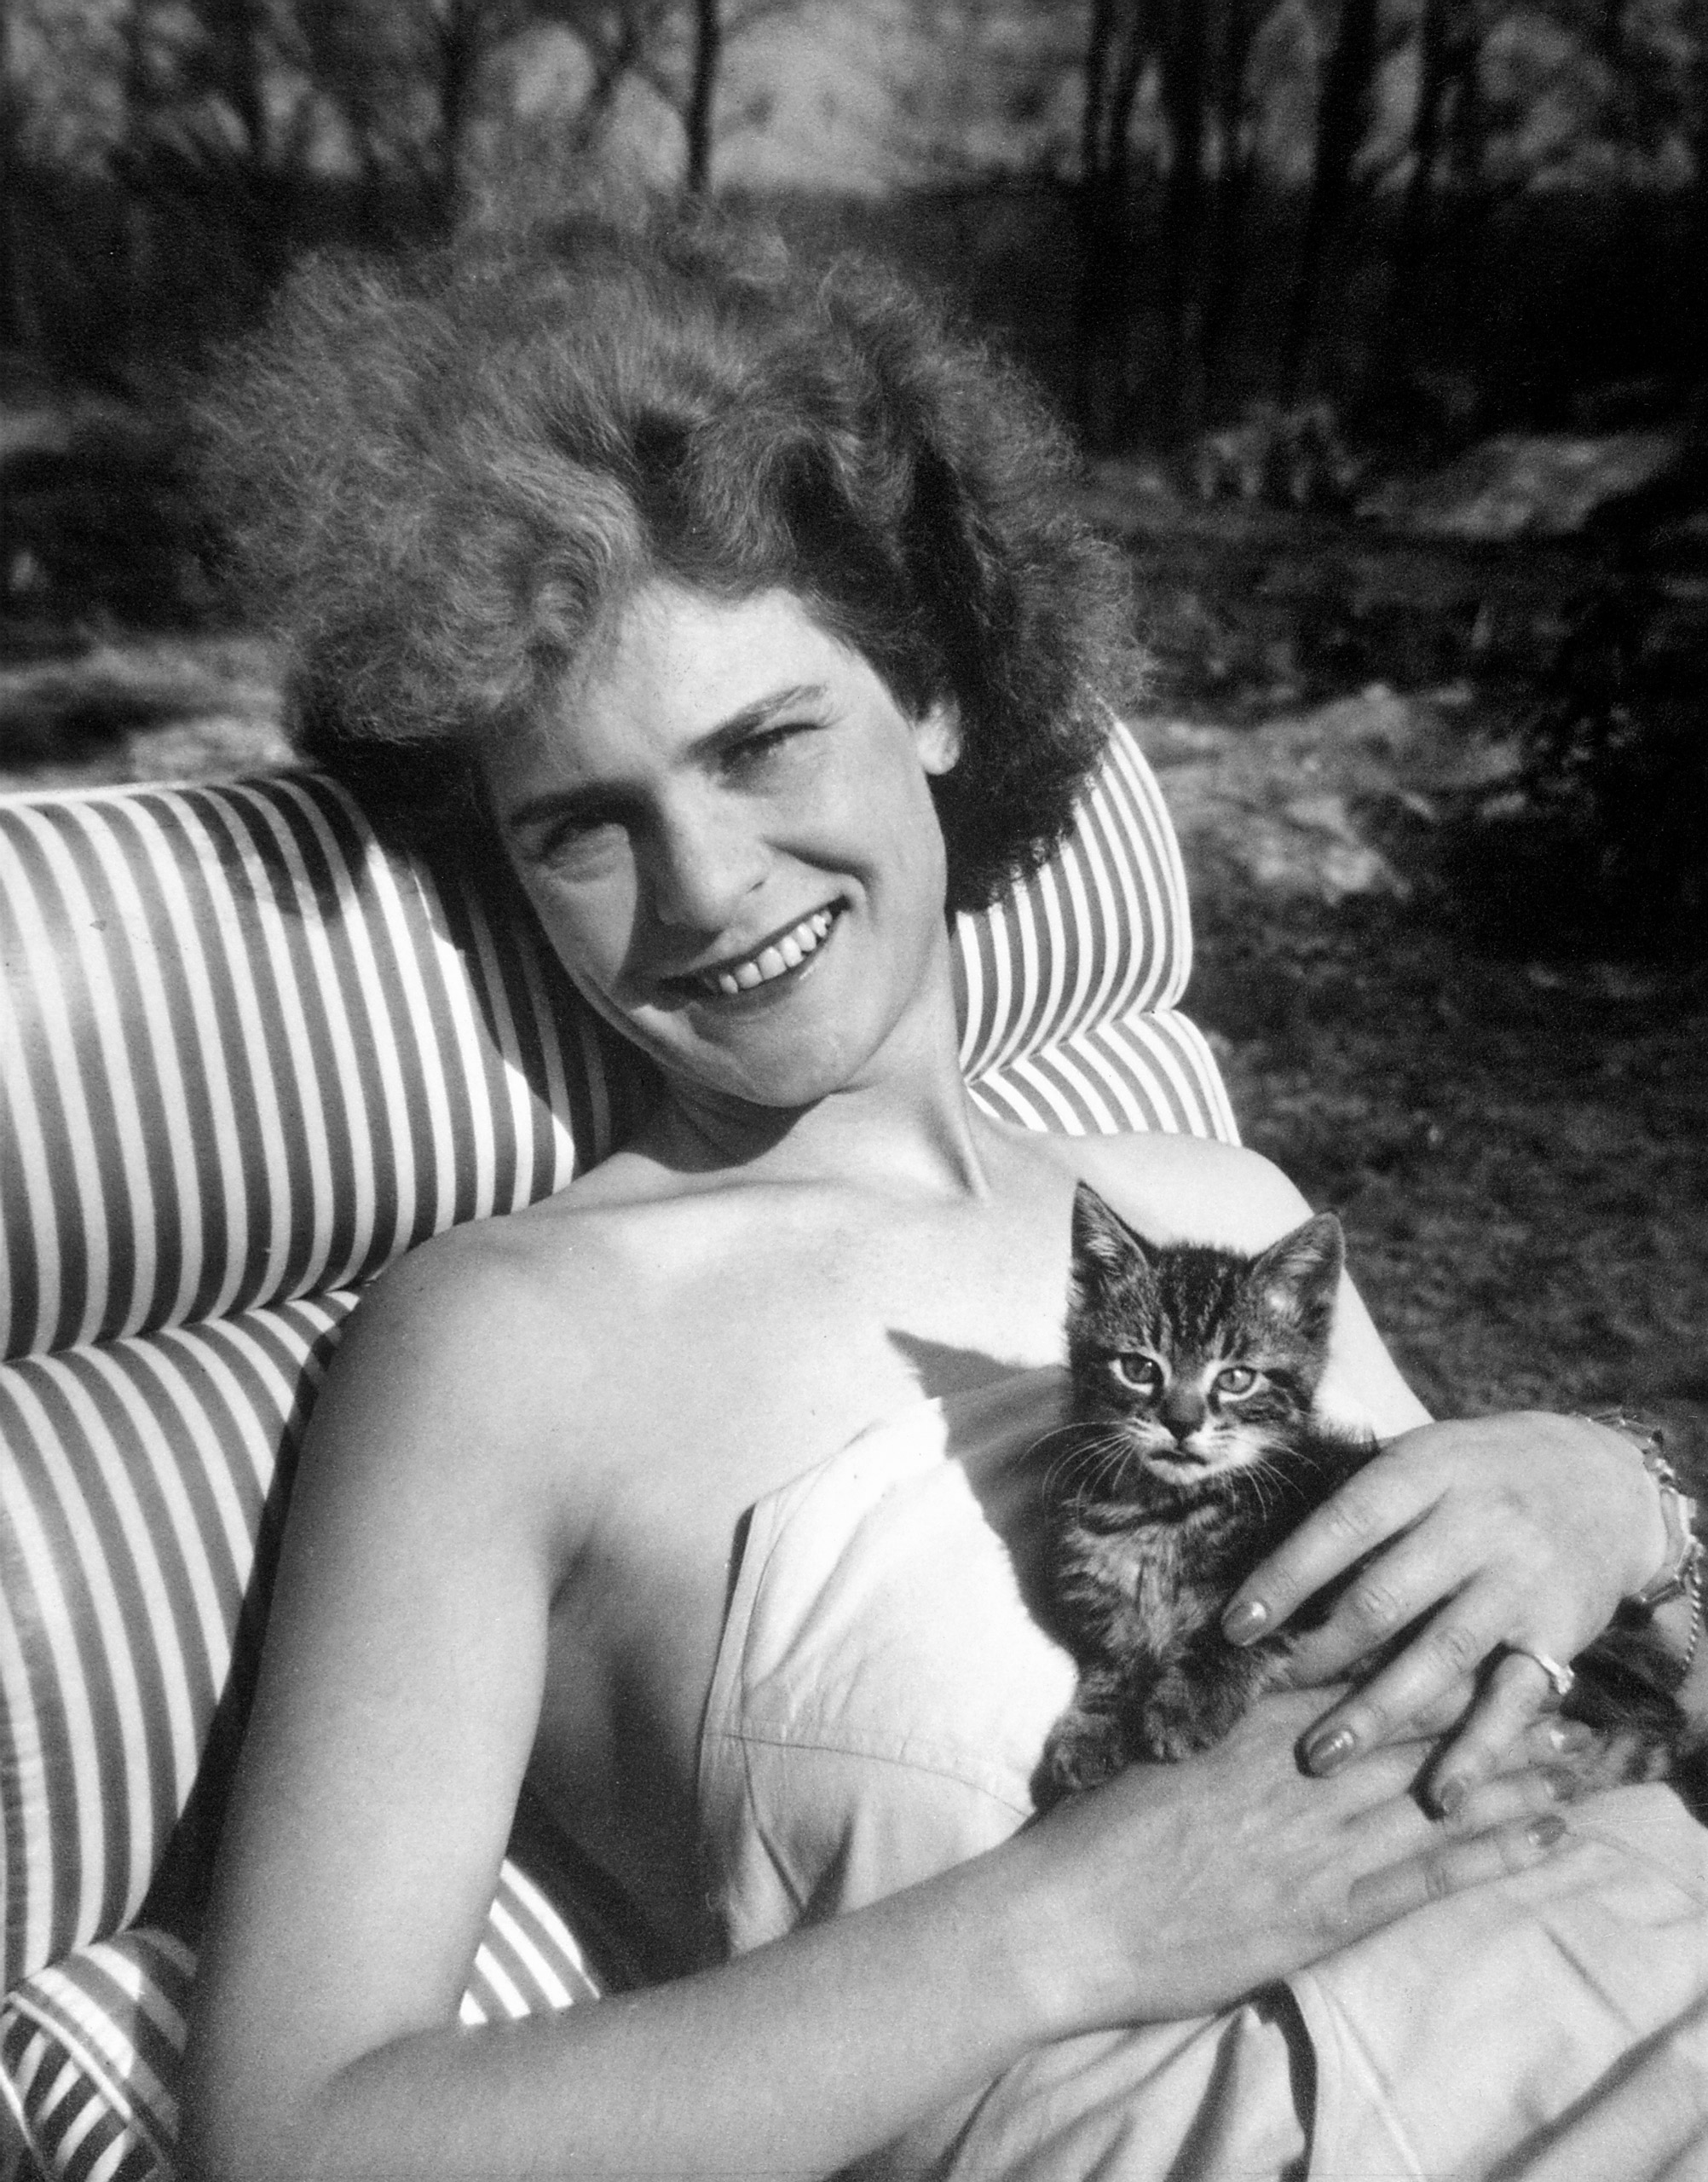 Photographer Margaret Bourke-White and her cat, 1940.